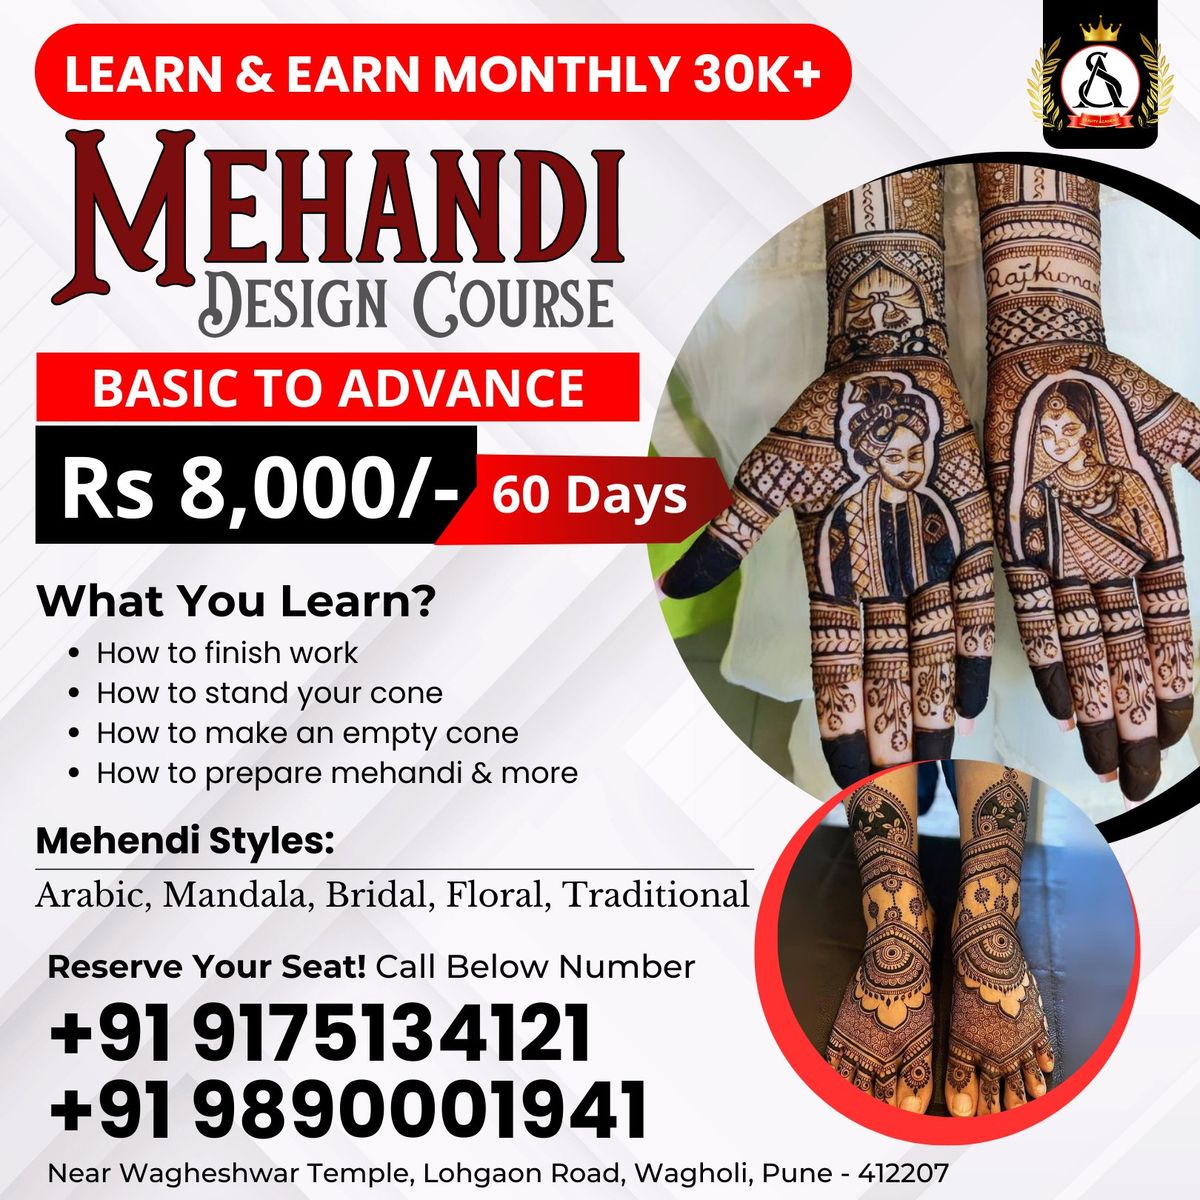 Complete Mehandi Design Course (Basic to Advance)